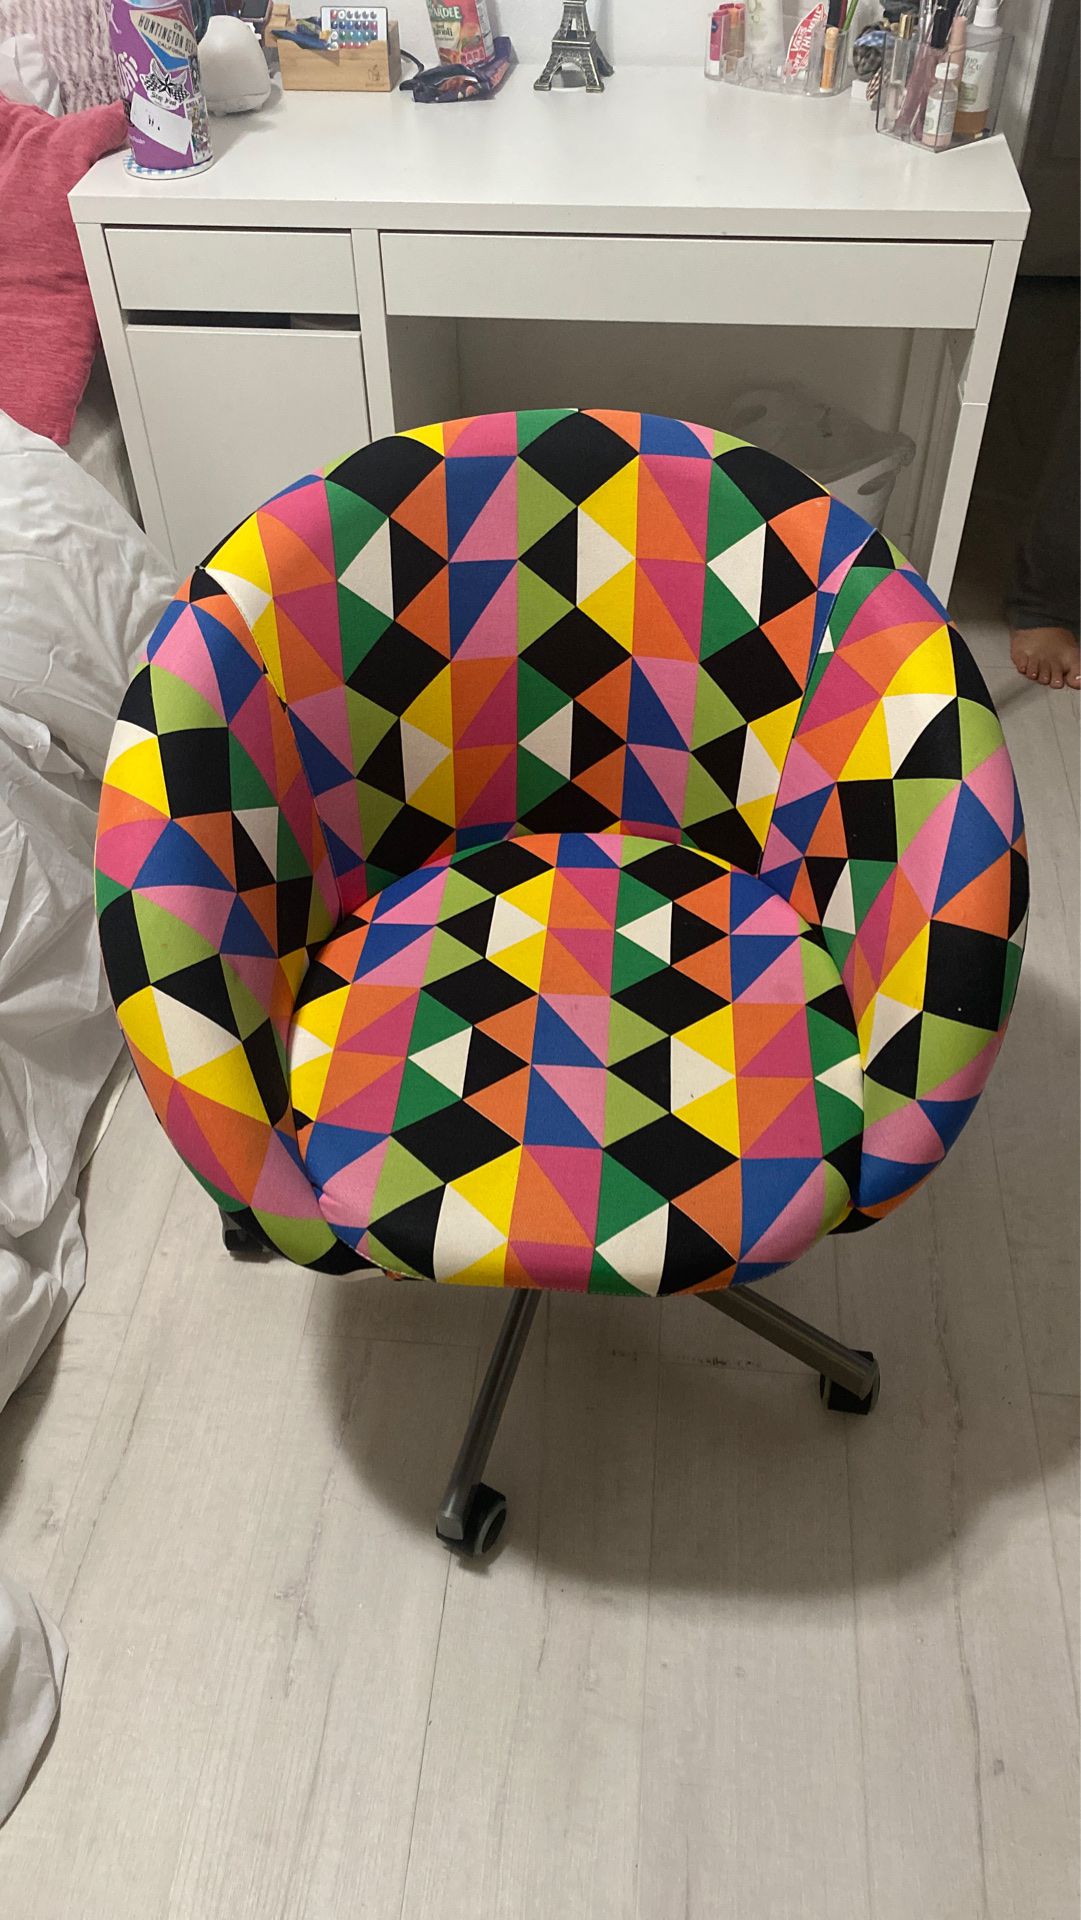 Colorful Desk Chair from IKEA